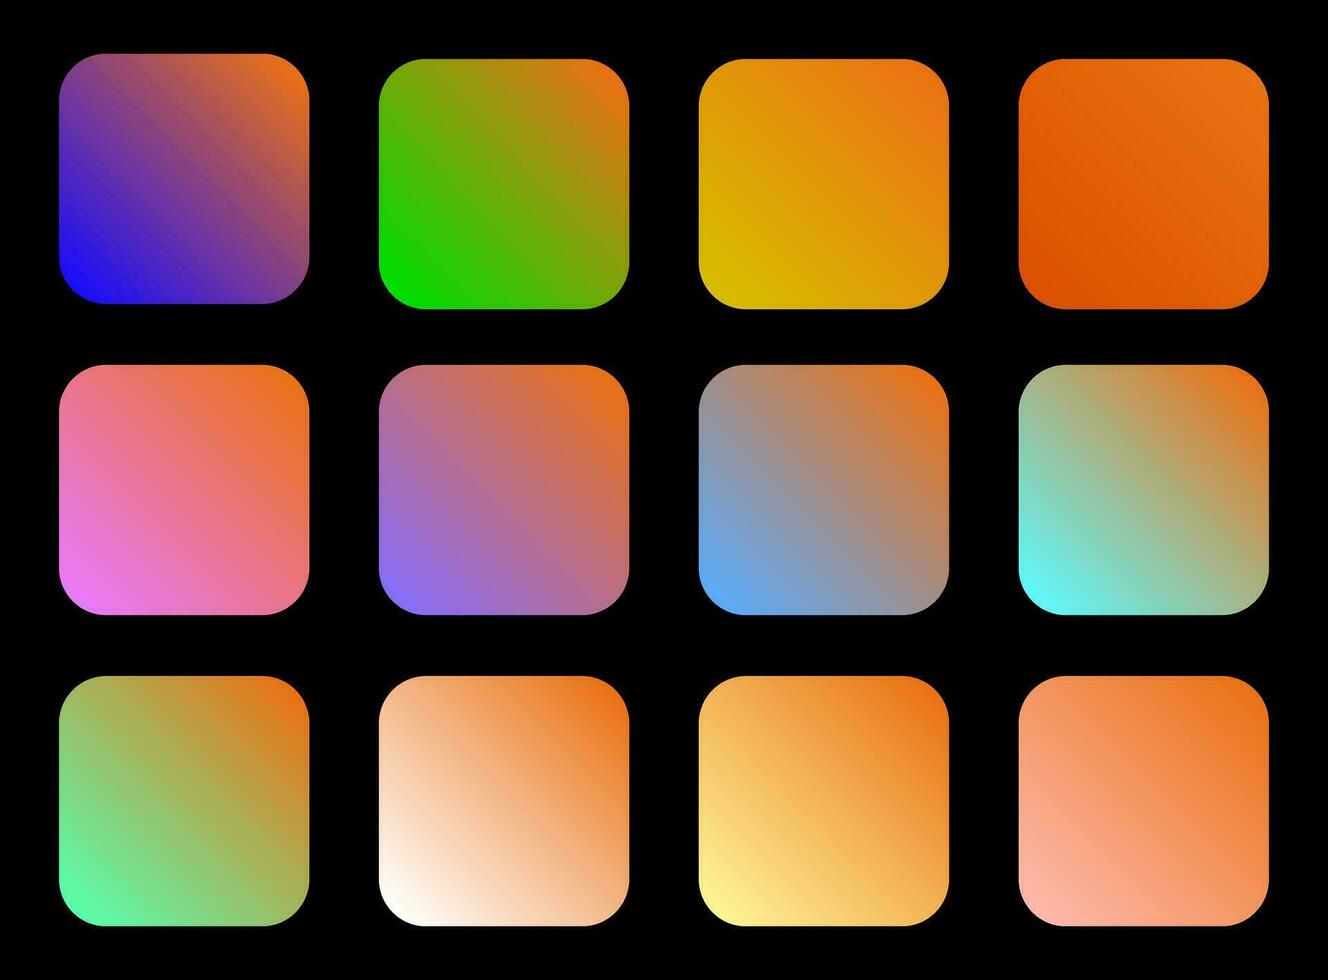 Colorful Carrot Color Shade Linear Gradient Palette Swatches Web Kit Rounded Squares Template Set vector